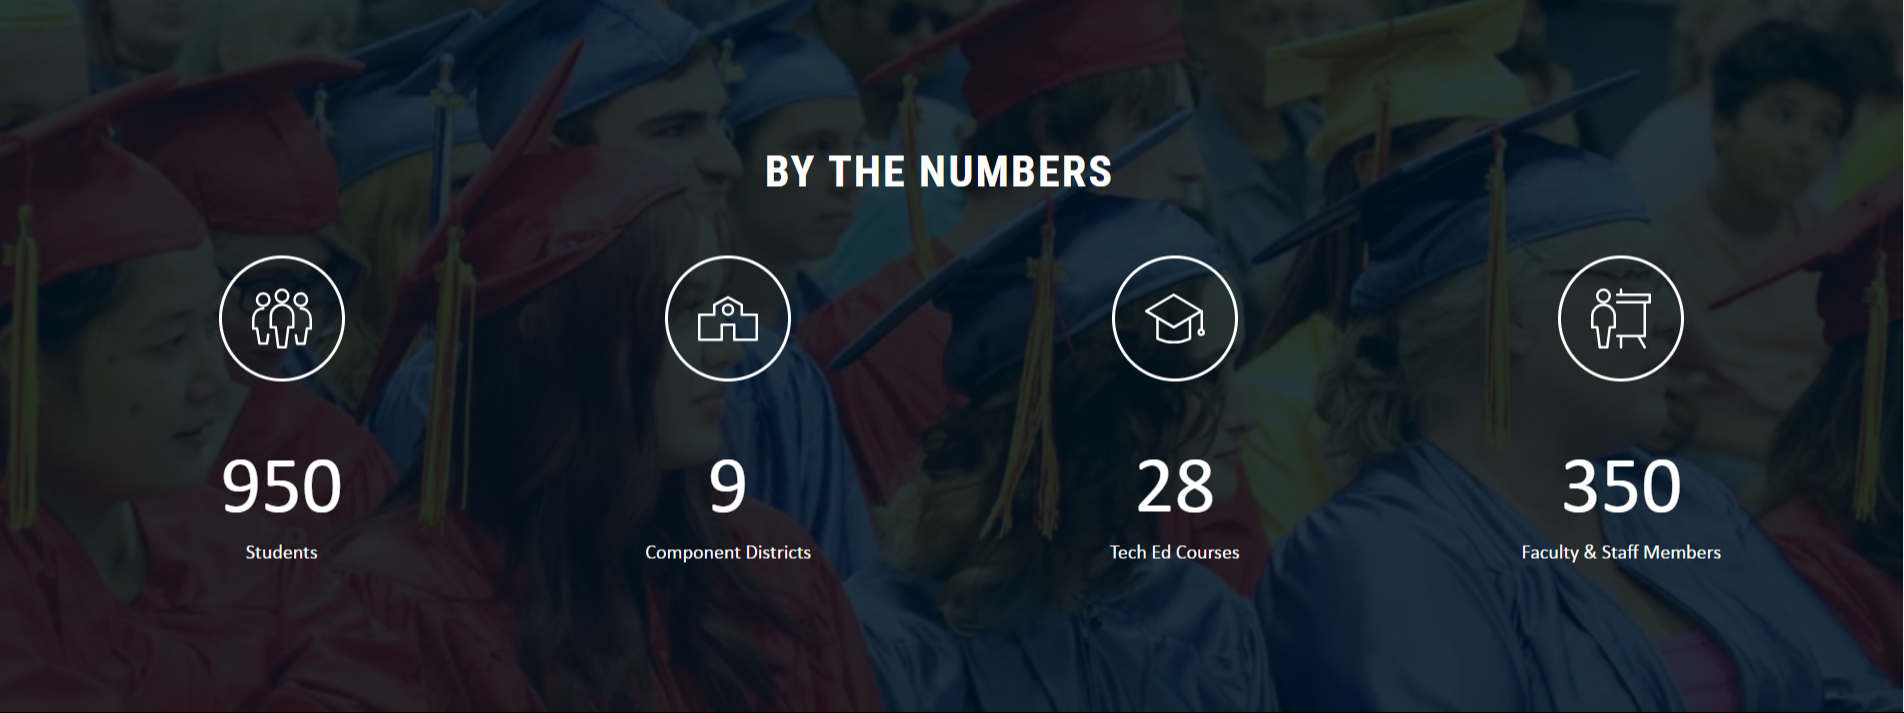 BY the numbers: 950 students, 9 component districts, 28 Tech Ed Courses,  350 faculty and staff